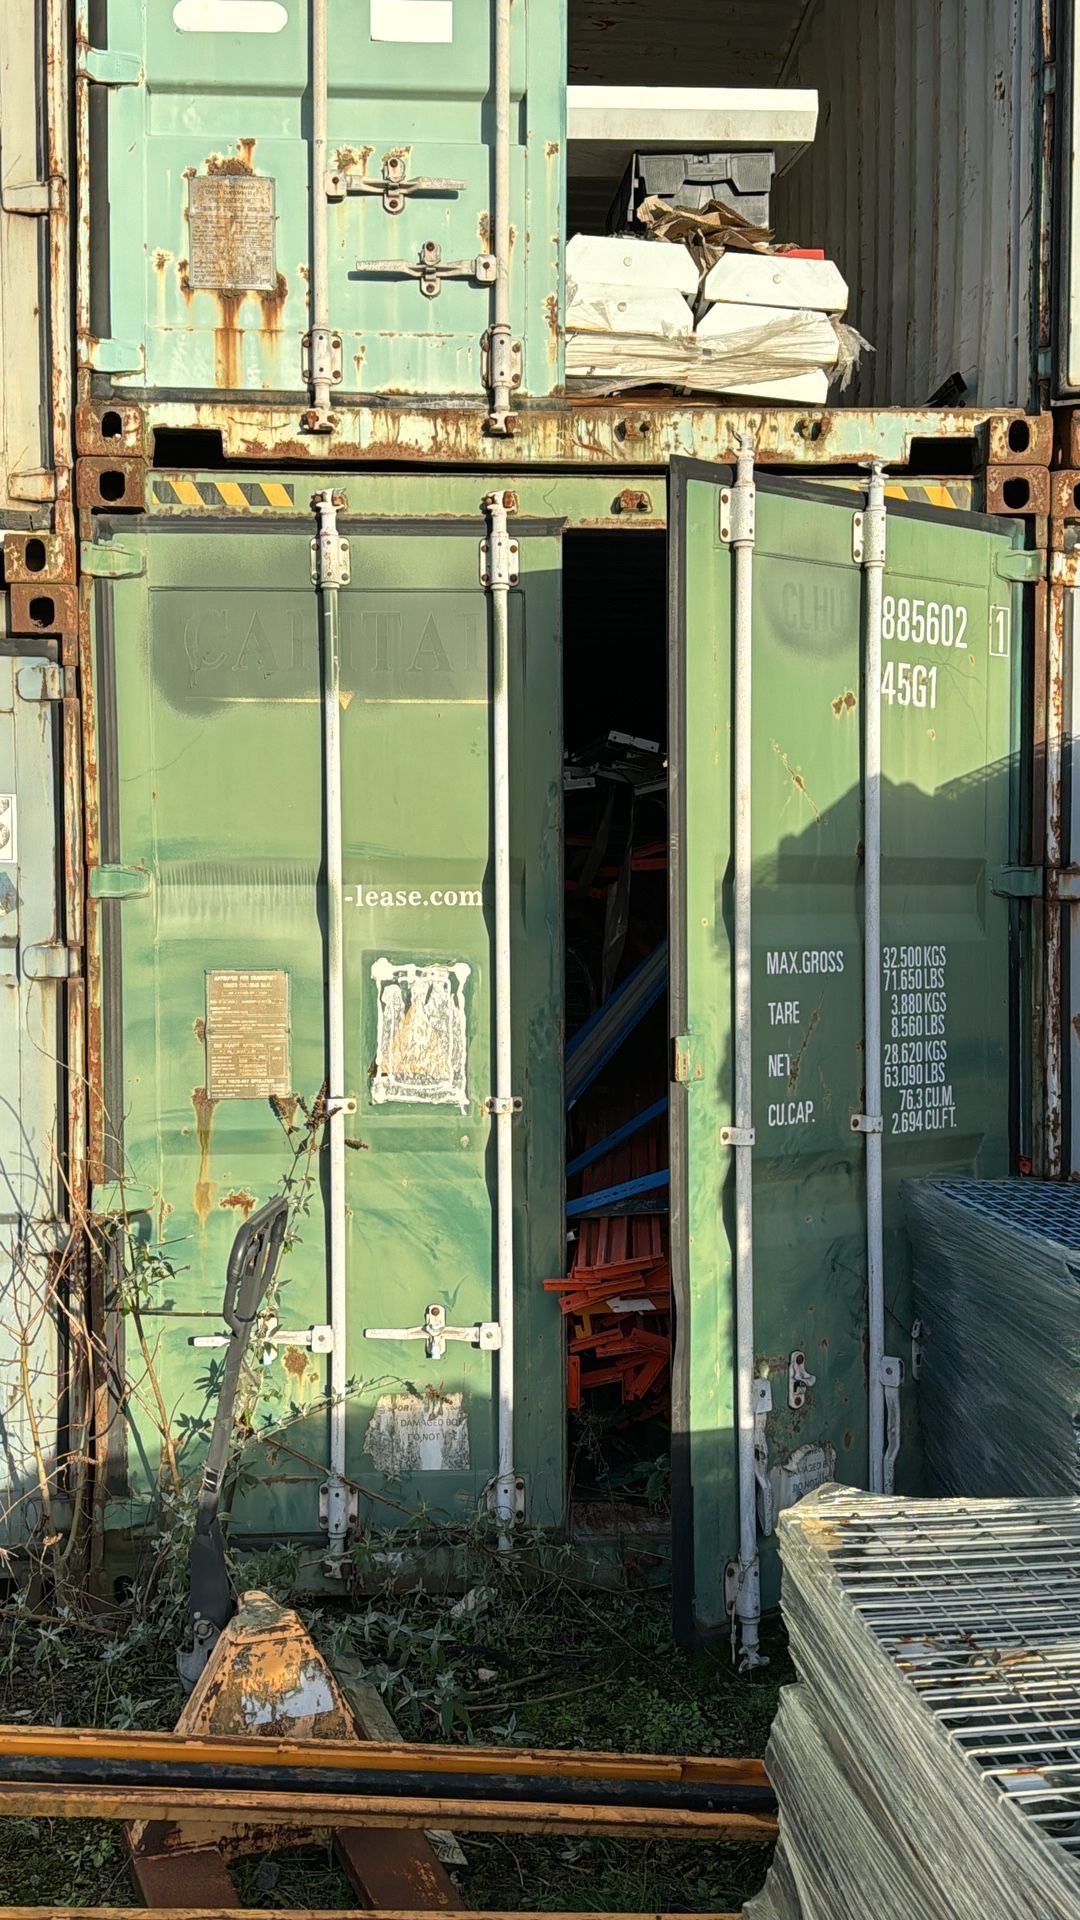 Shipping Container - 33 (CLHU885602145G1)